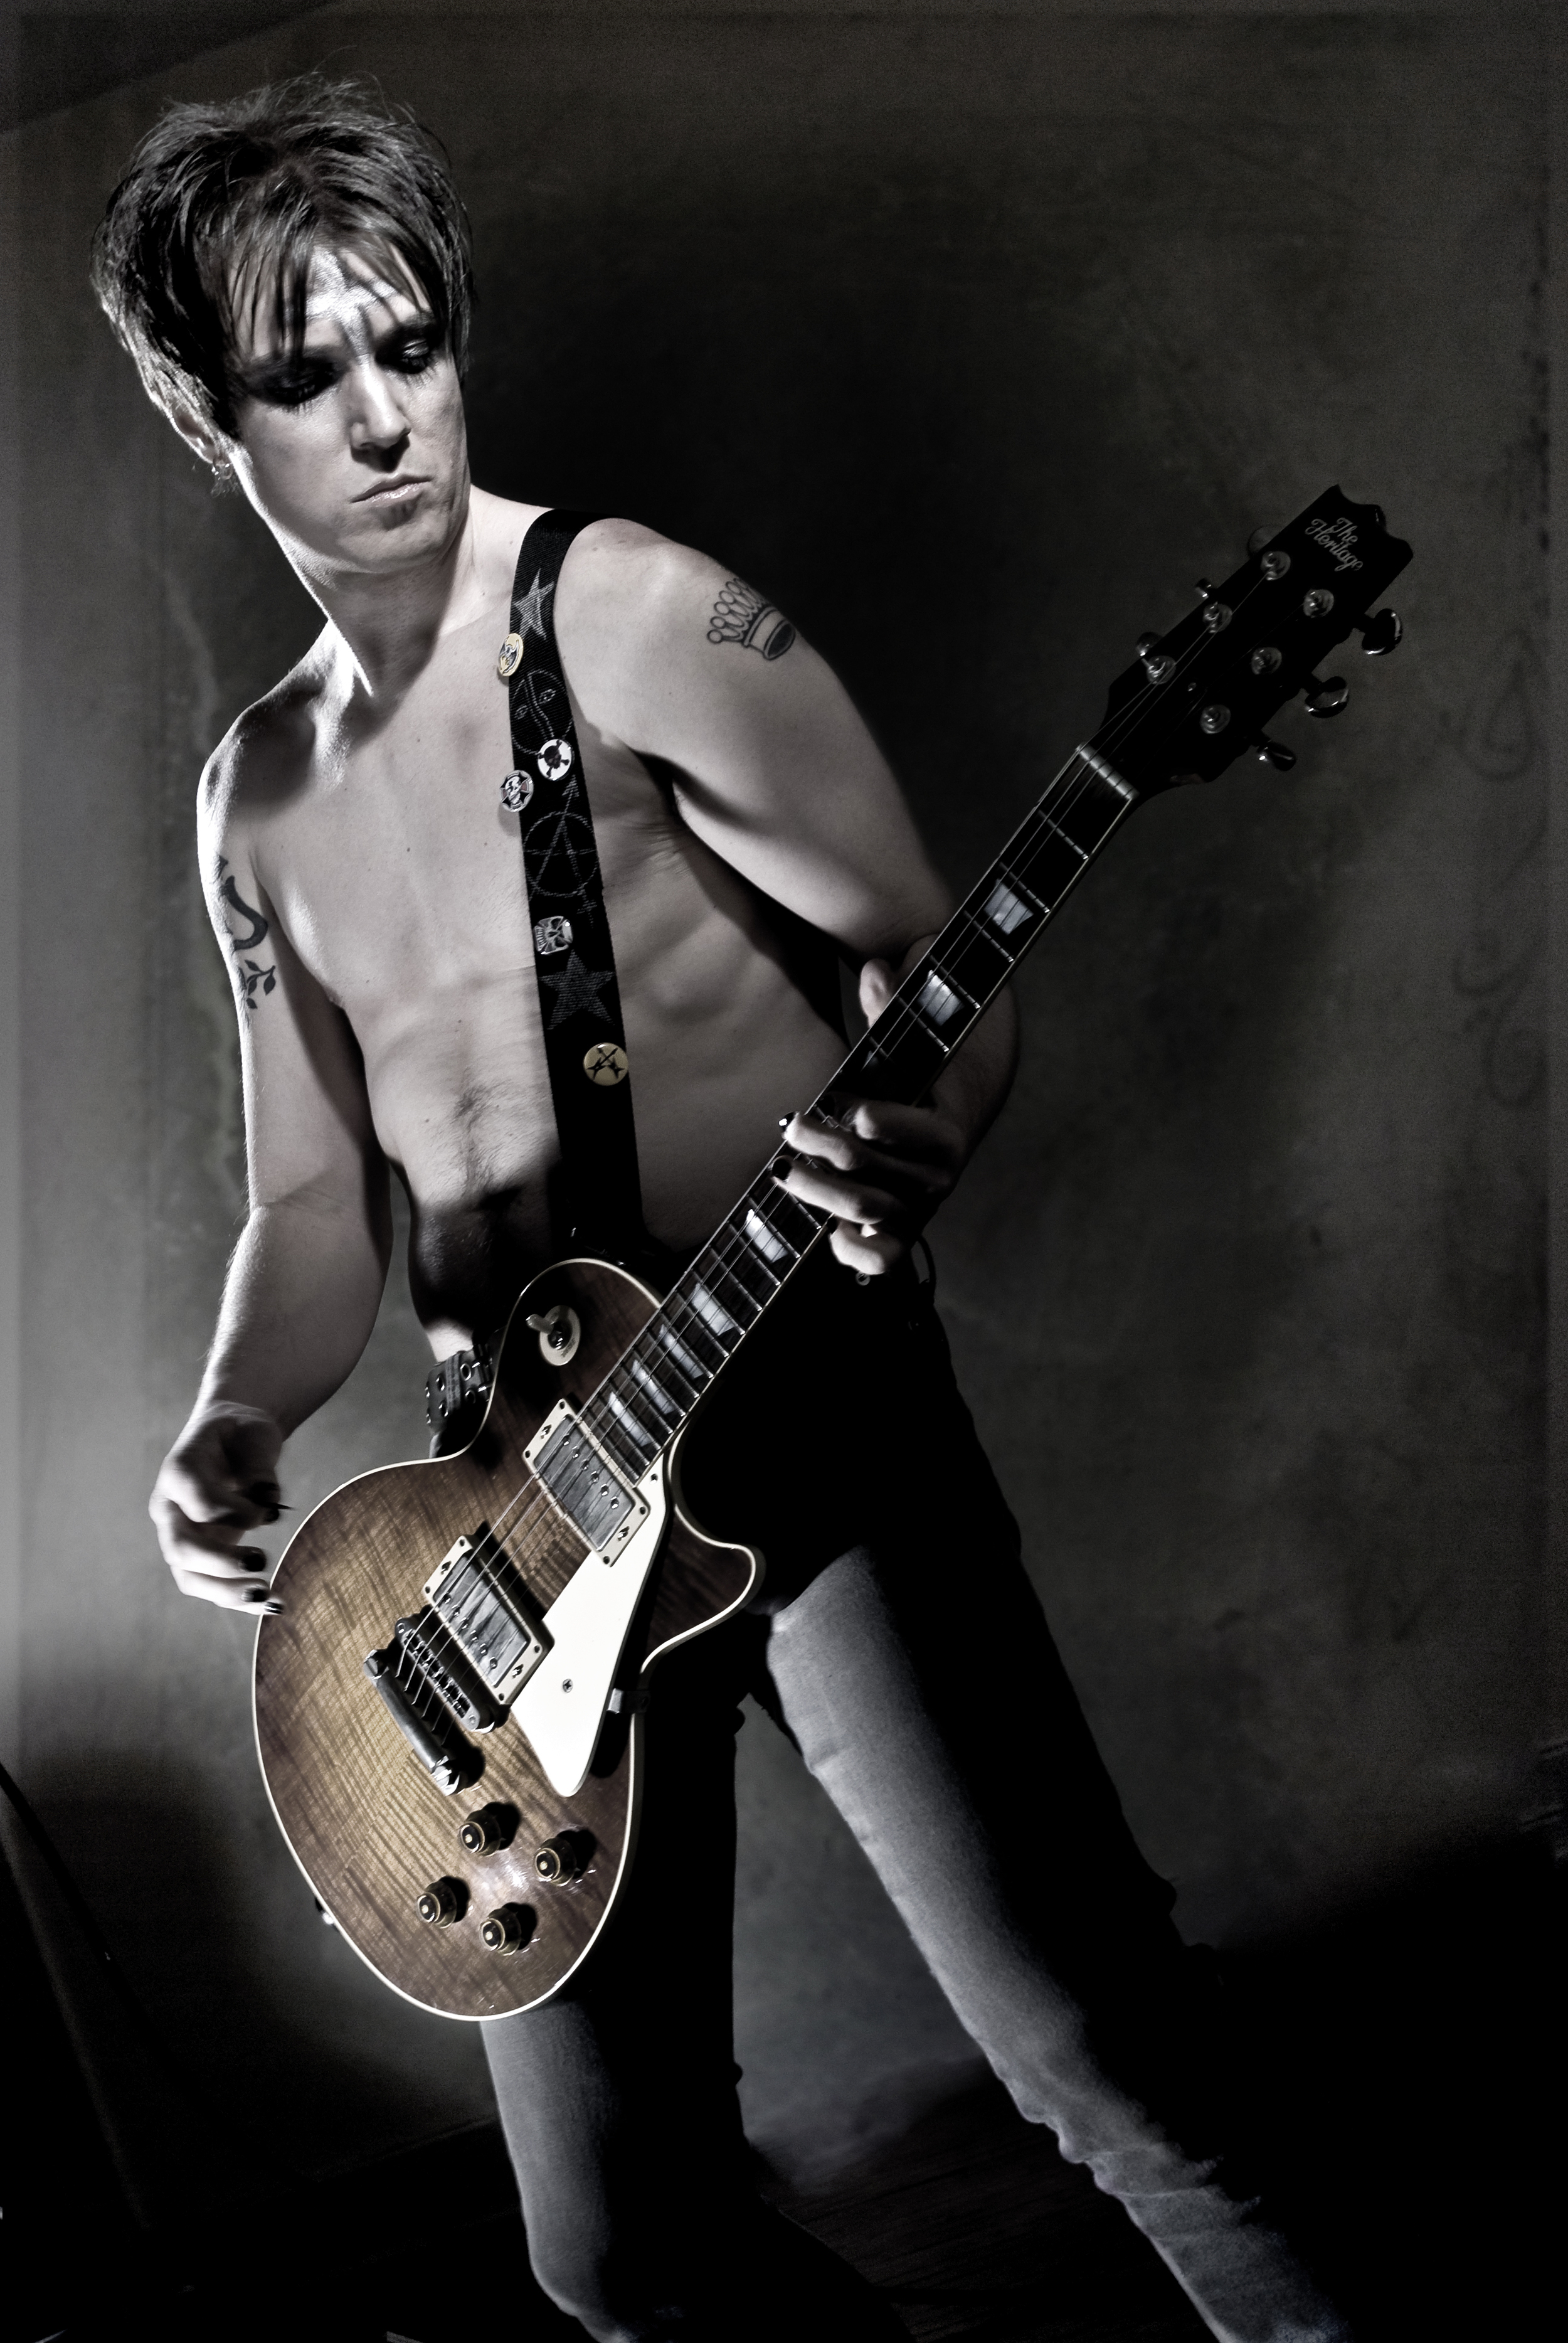 "Tommy Gnosis" promo photo from HEDWIG AND THE ANGRY INCH